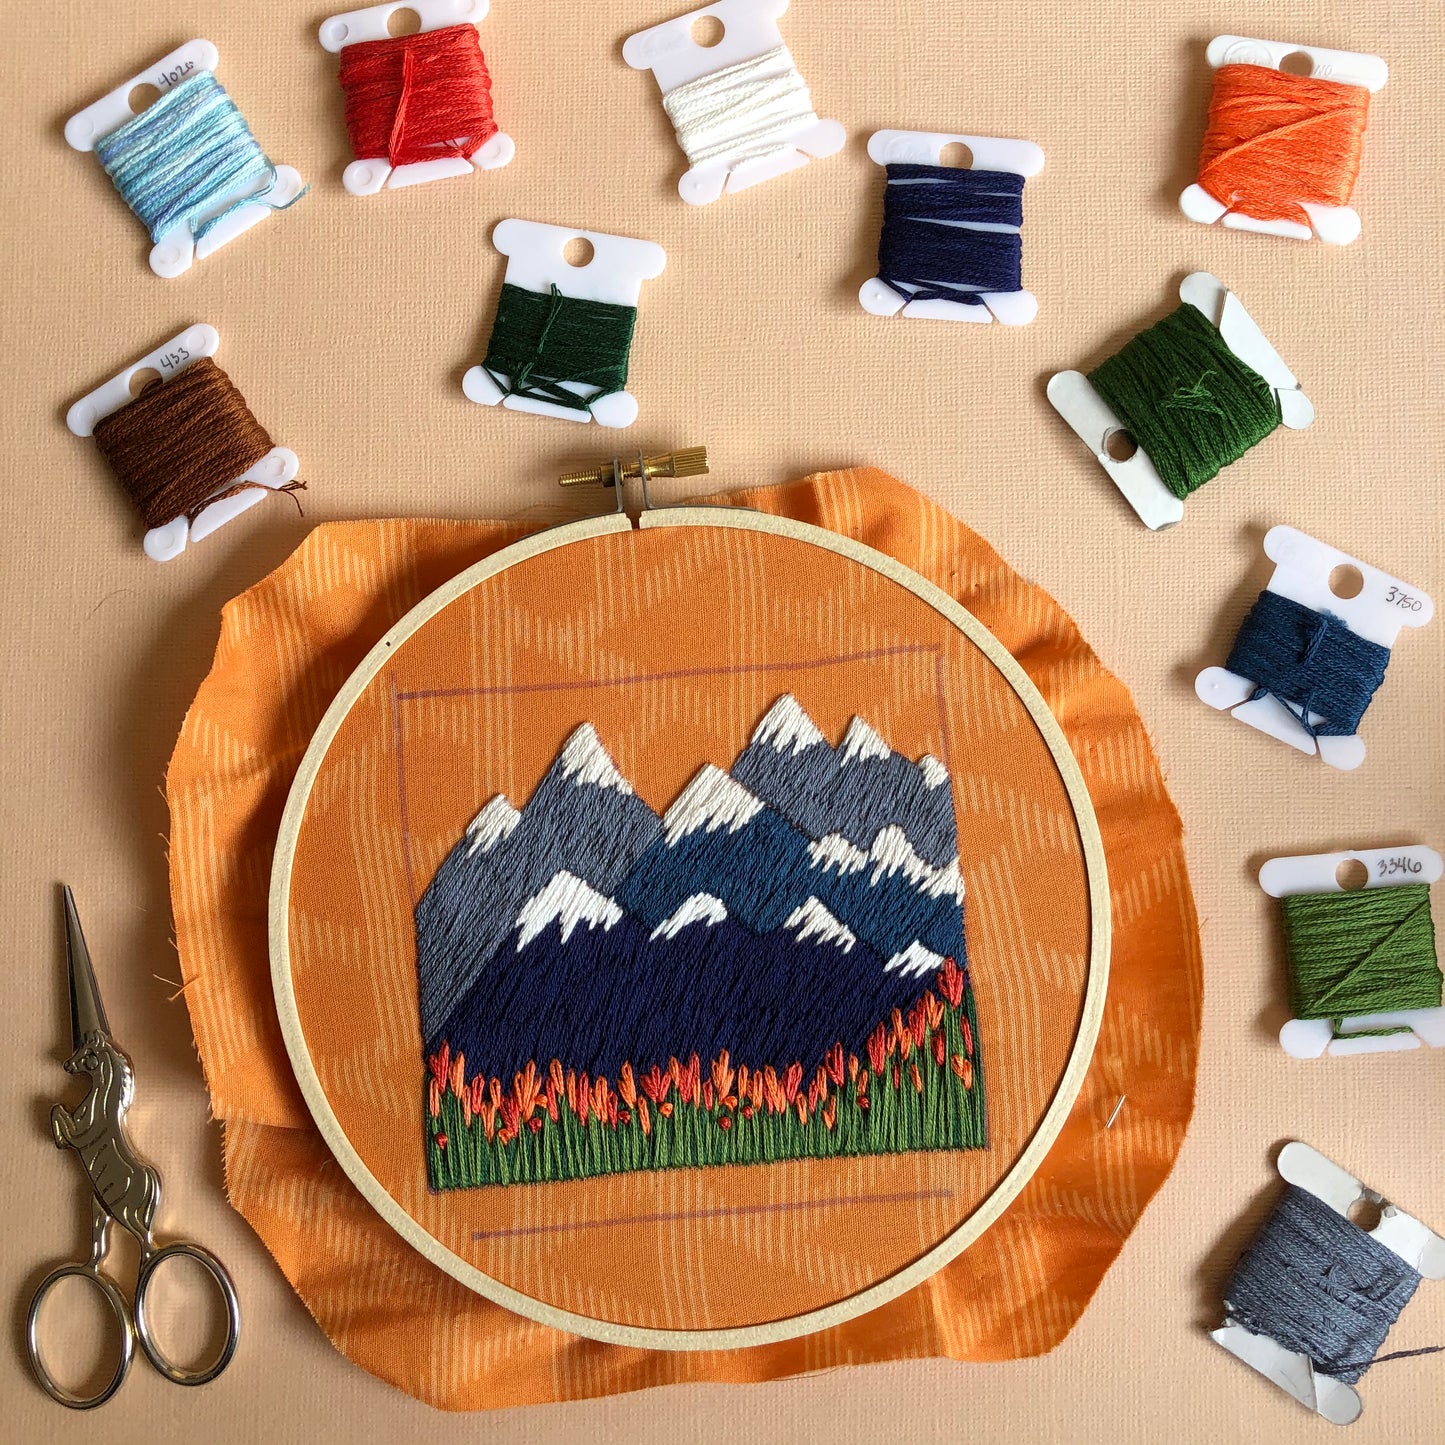 PNW Mountains and Tulips - Intermediate DIY Embroidery Craft Kit